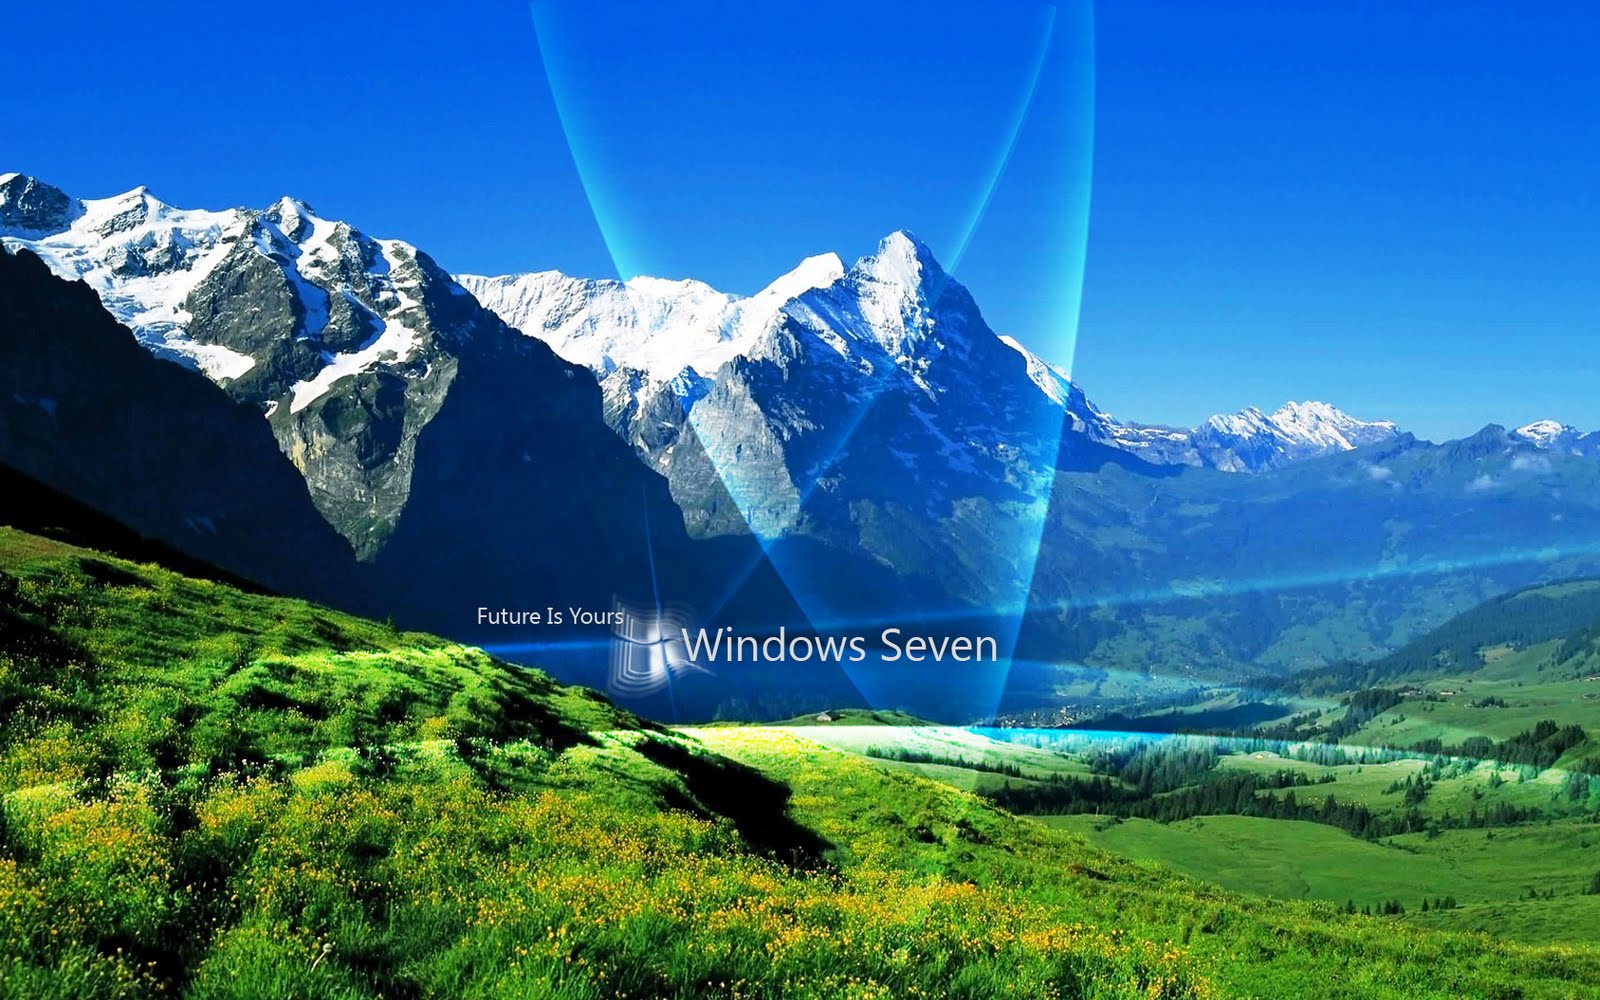 Panoramic Wallpaper of Windows 7 Images Gallery